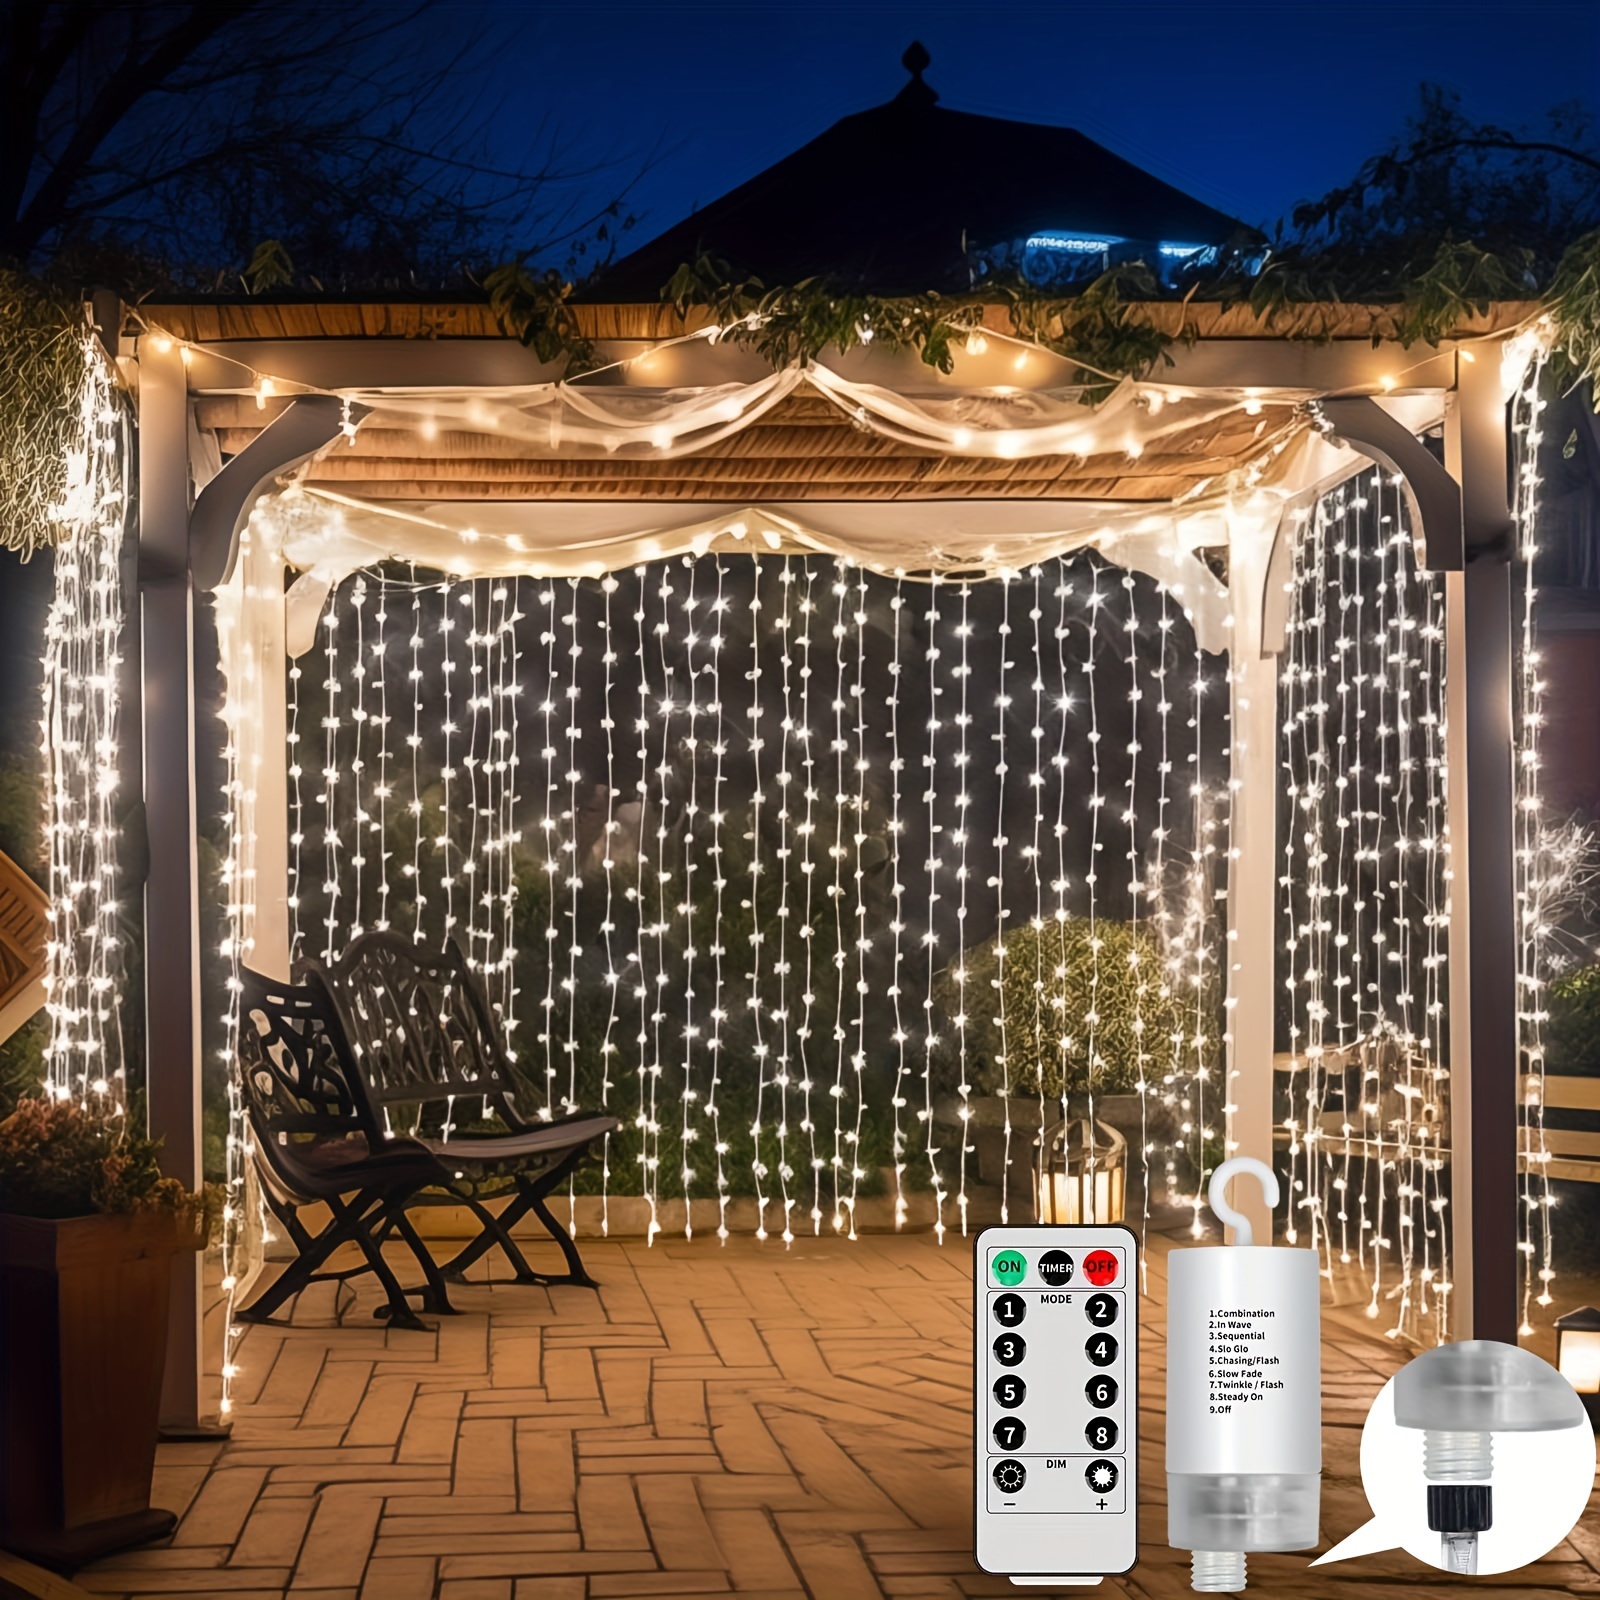 

Upgraded 300led Curtain Lights Battery Operated Outdoor Waterproof, 10ftx10ft Twinkle Hanging Waterfall Lights With Remote Control, 8 Mode Dimmable String Fairy Lights For Bedroom Porch Gazebo